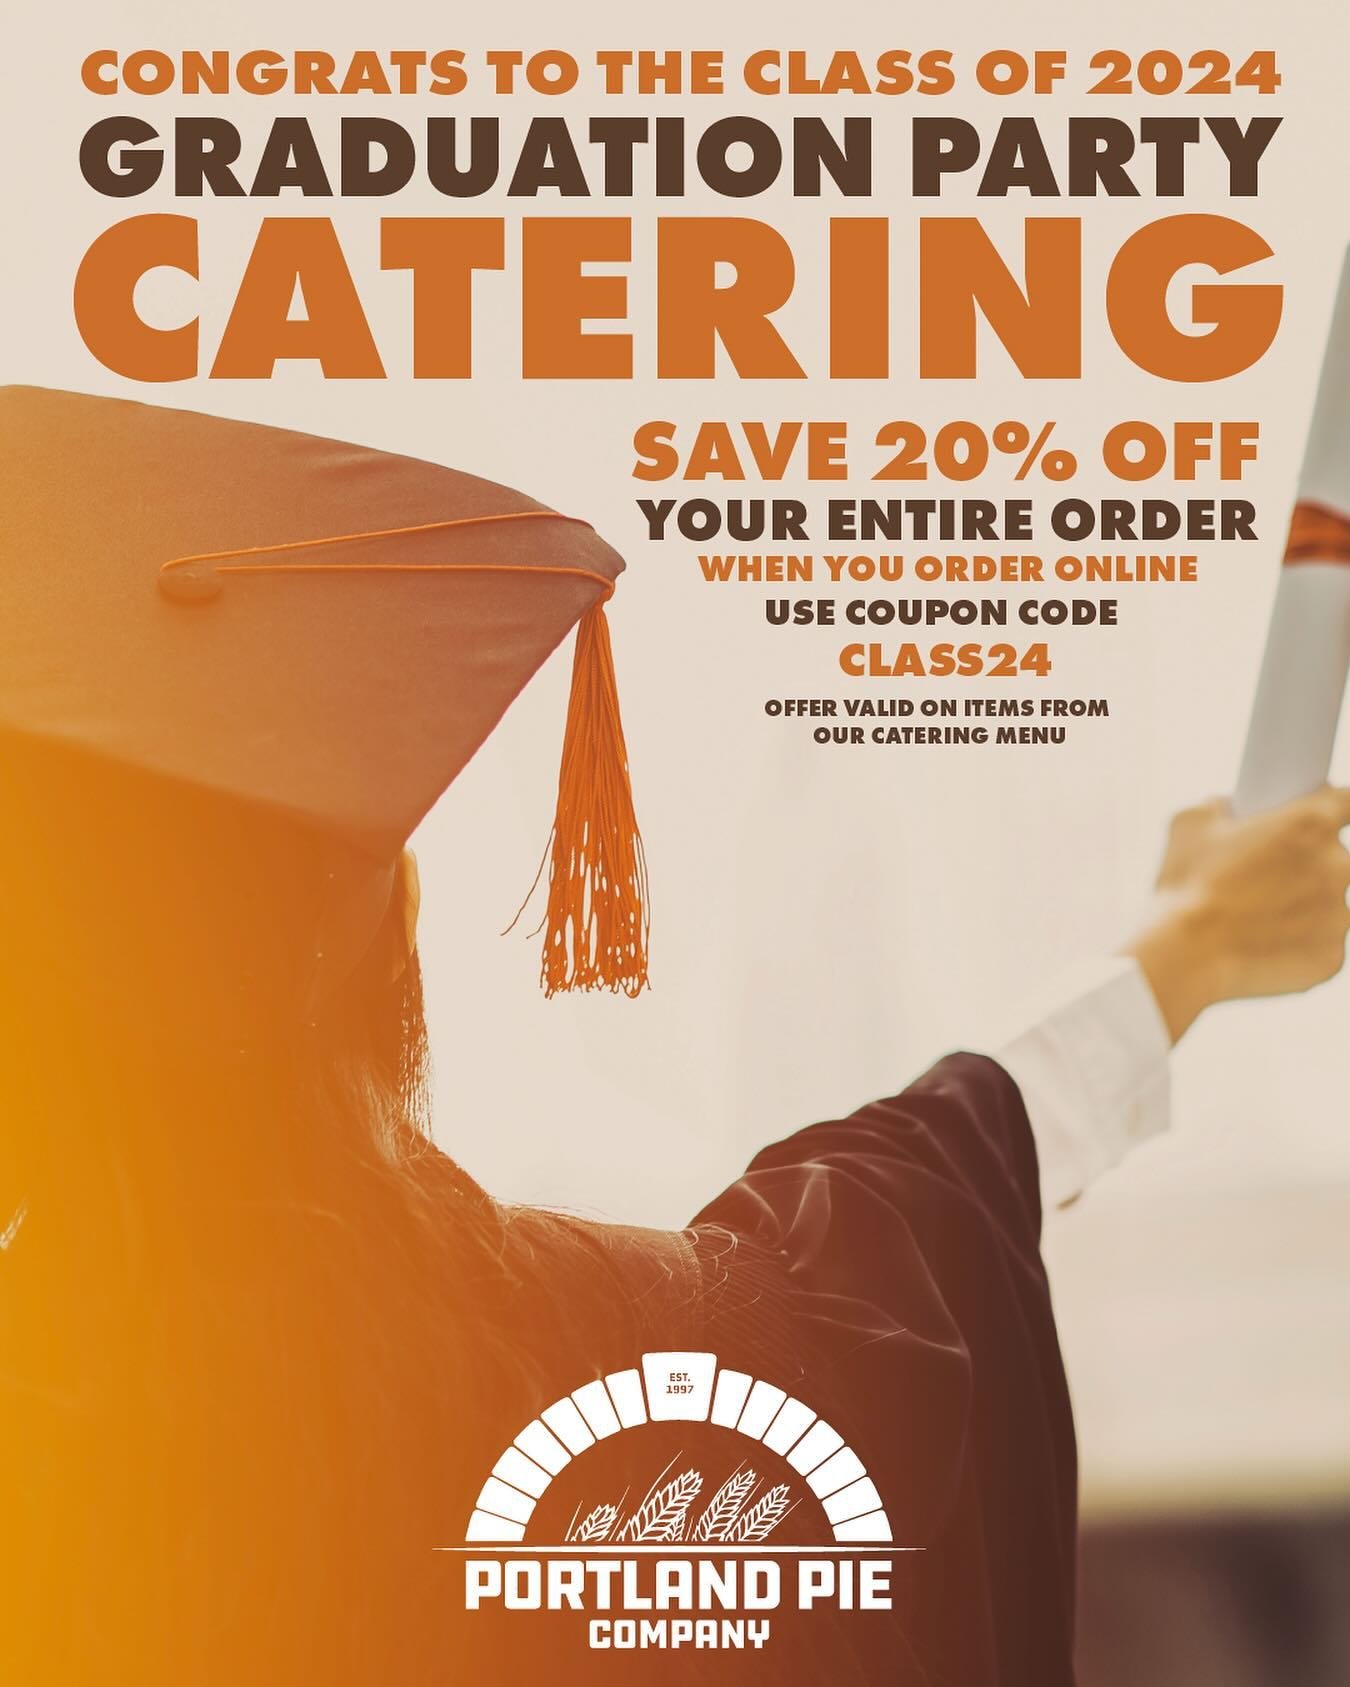 Congrats to the Class of 2024! You&rsquo;ve worked hard. Now it&rsquo;s time to party. Let Portland Pie Company cater your big event. Get 20% off your entire catering order when order online and use coupon code CLASS24. Check out our full catering me